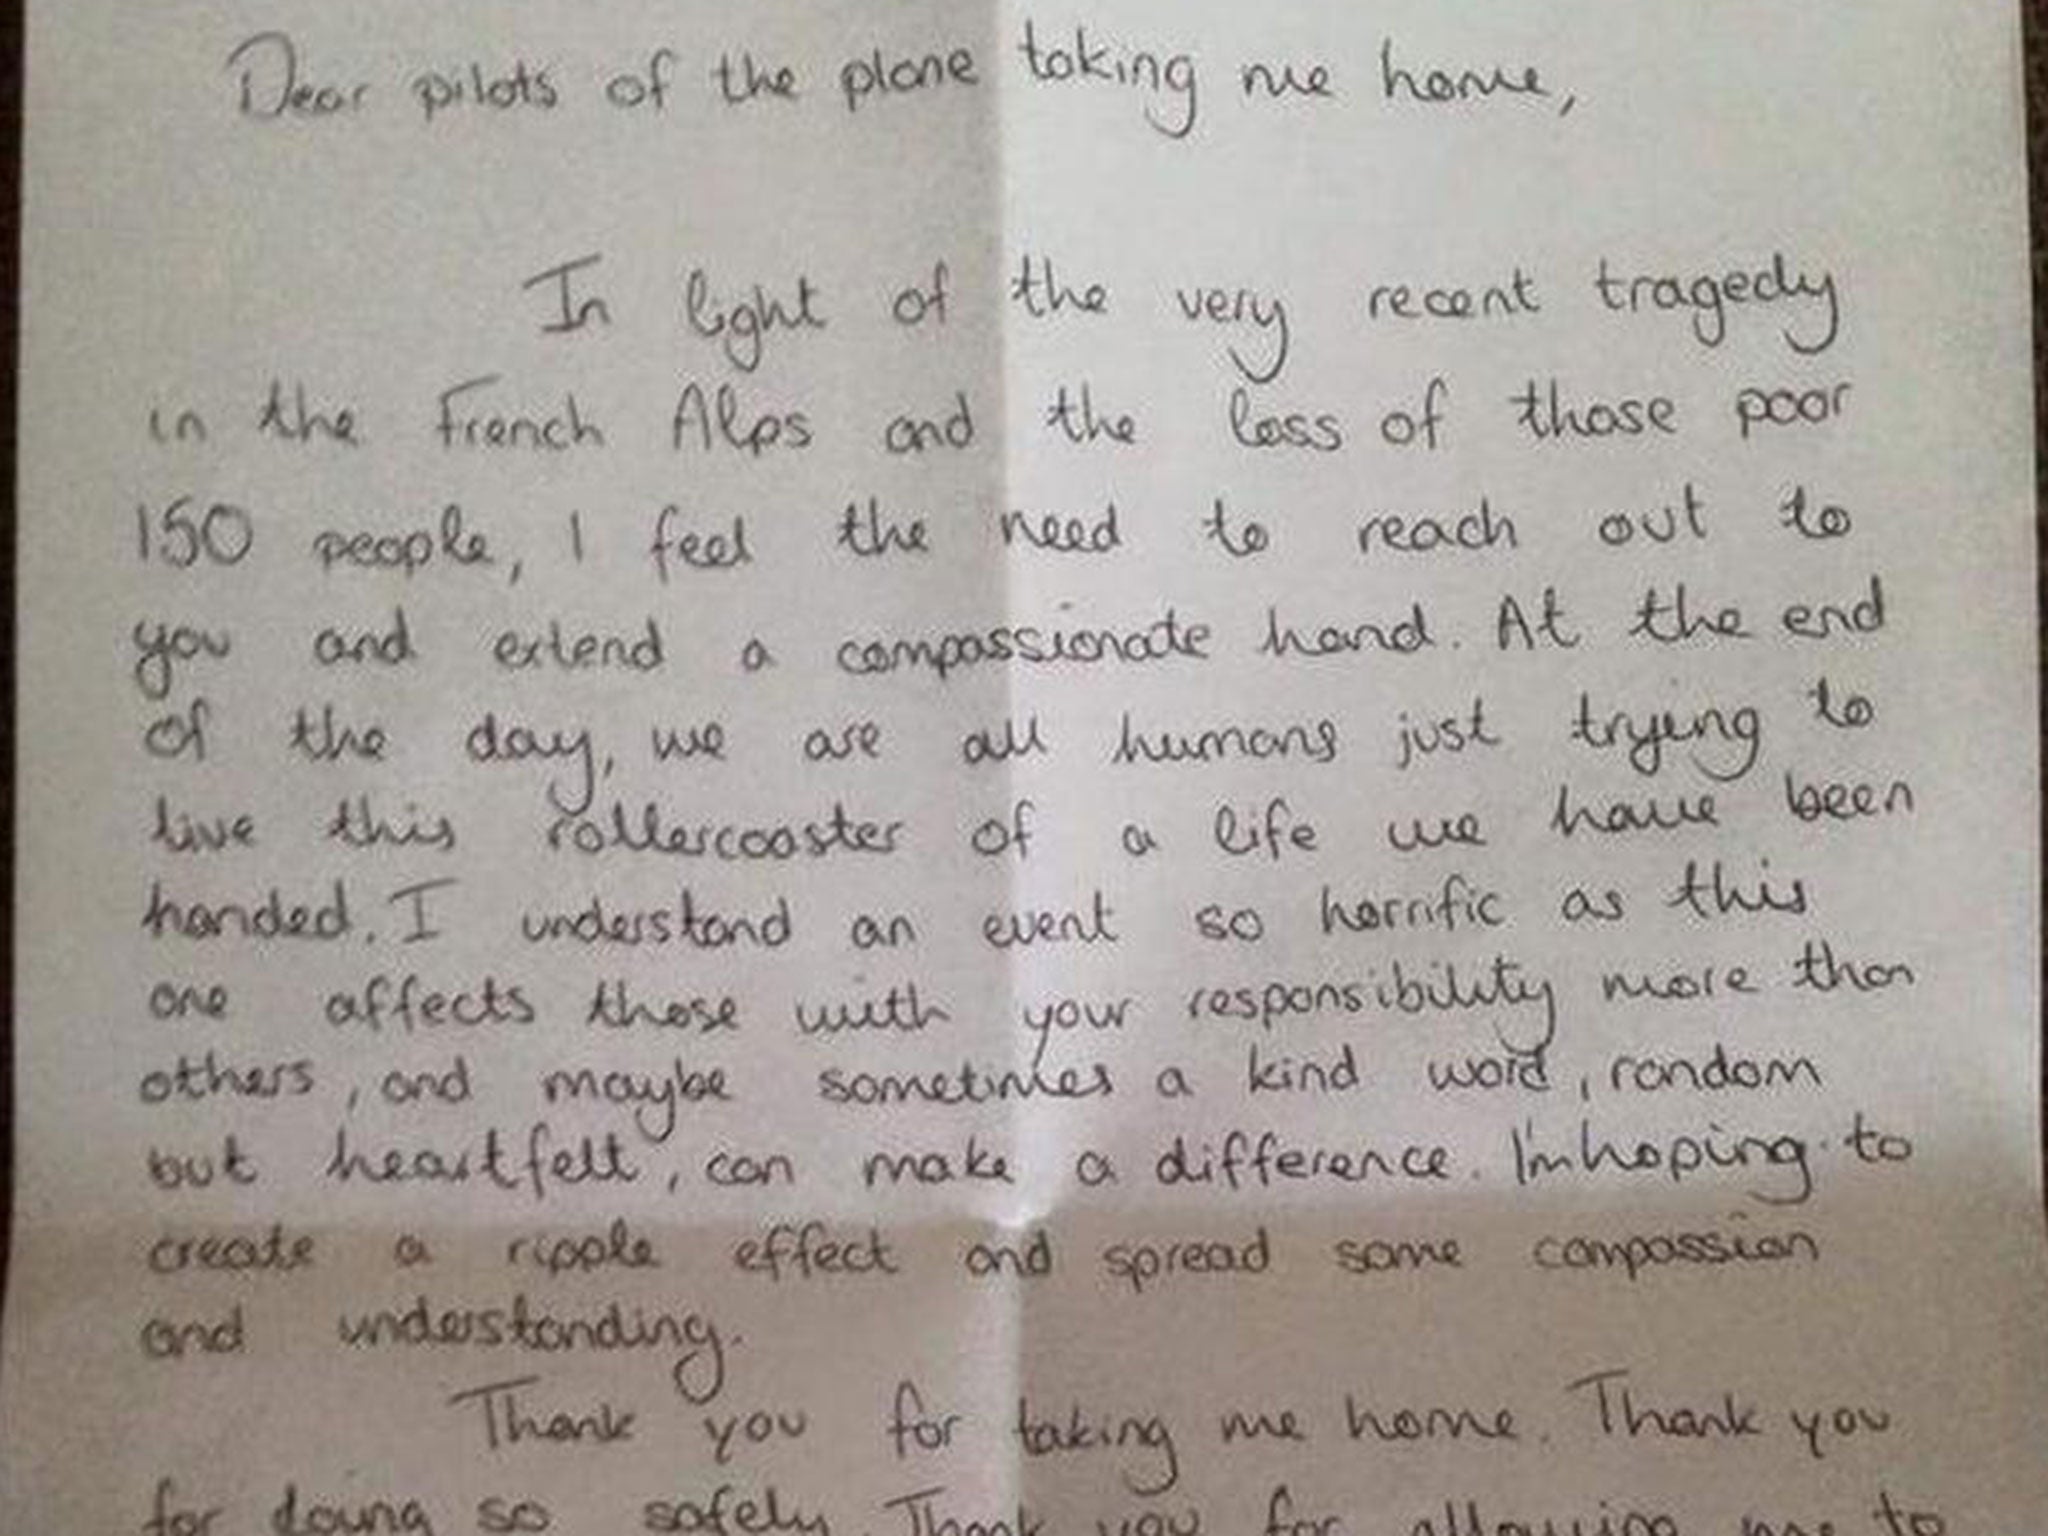 The letter showed support for pilots after the Germanwings disaster